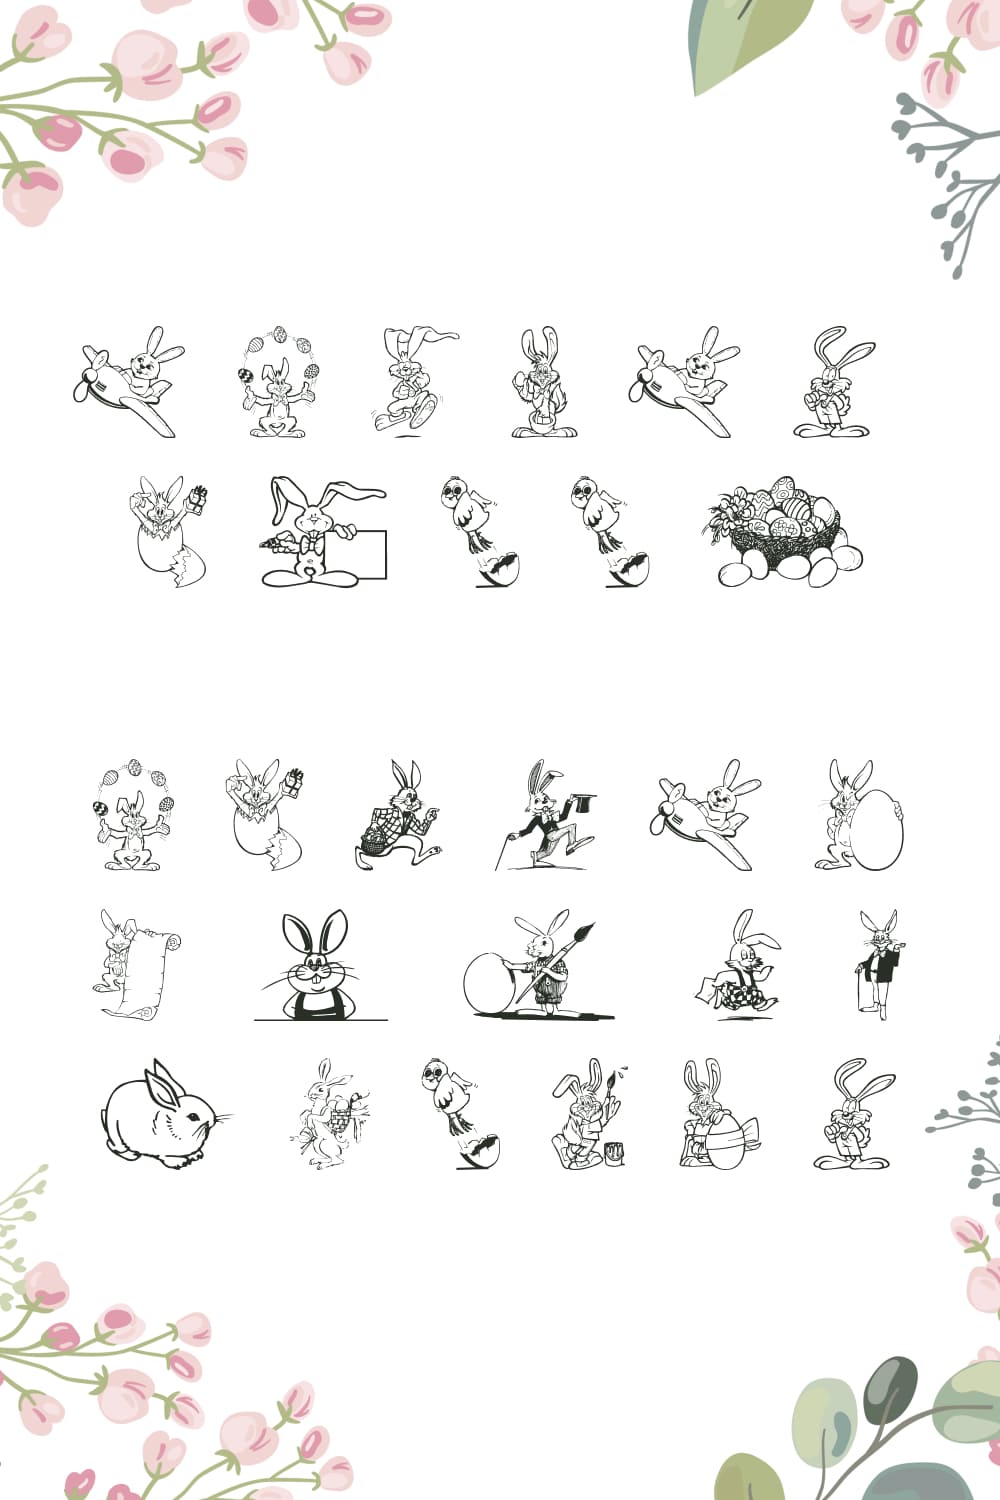 Little drawing rabbits on a white background.